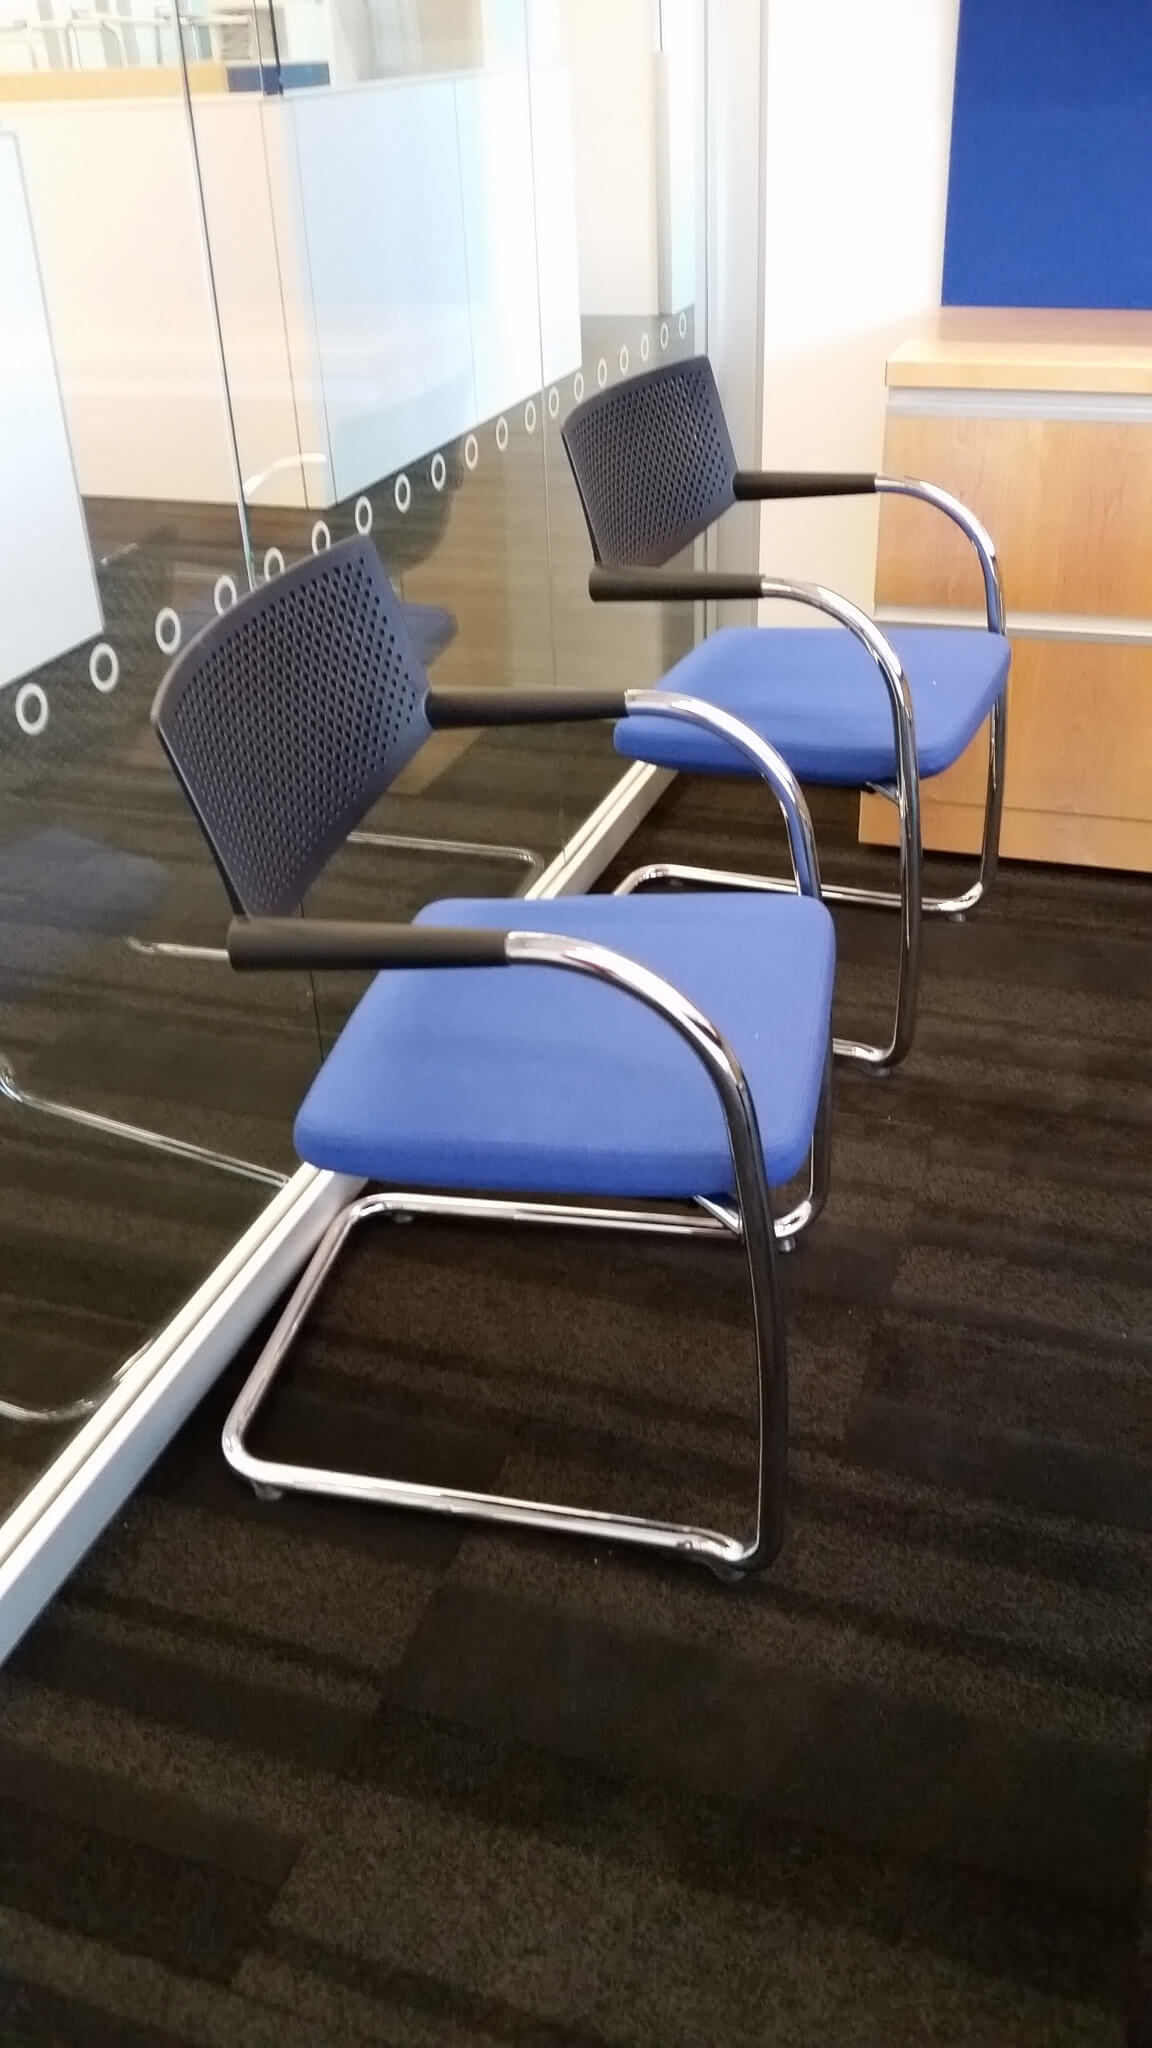 Used Office Chairs For Sale - Vitra Used Guest Chairs - Used Office Furniture